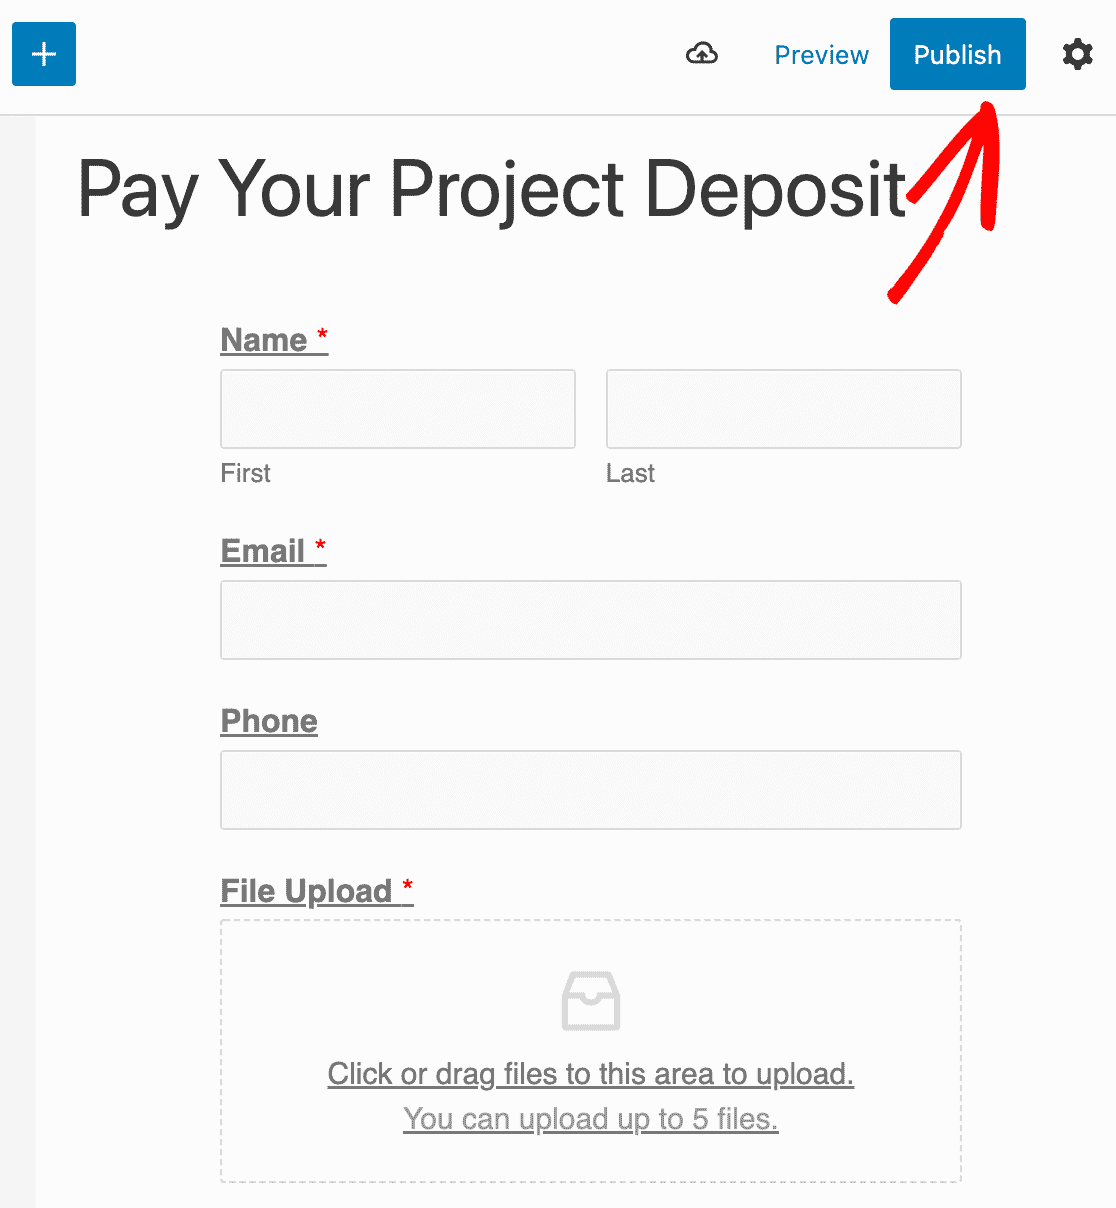 Publishing a File Upload form with payment